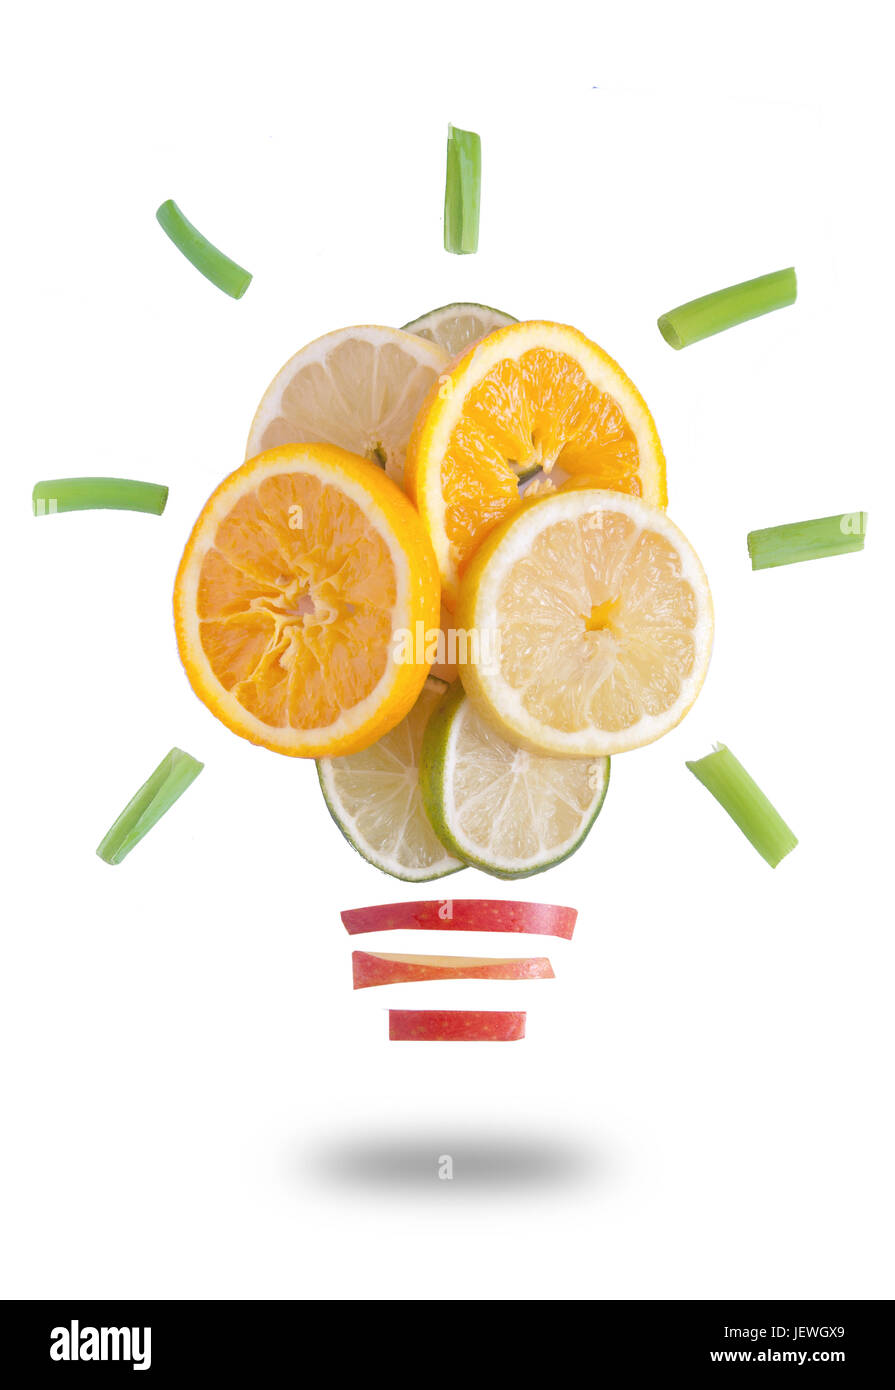 Light bulb made of fruit over a white background Stock Photo